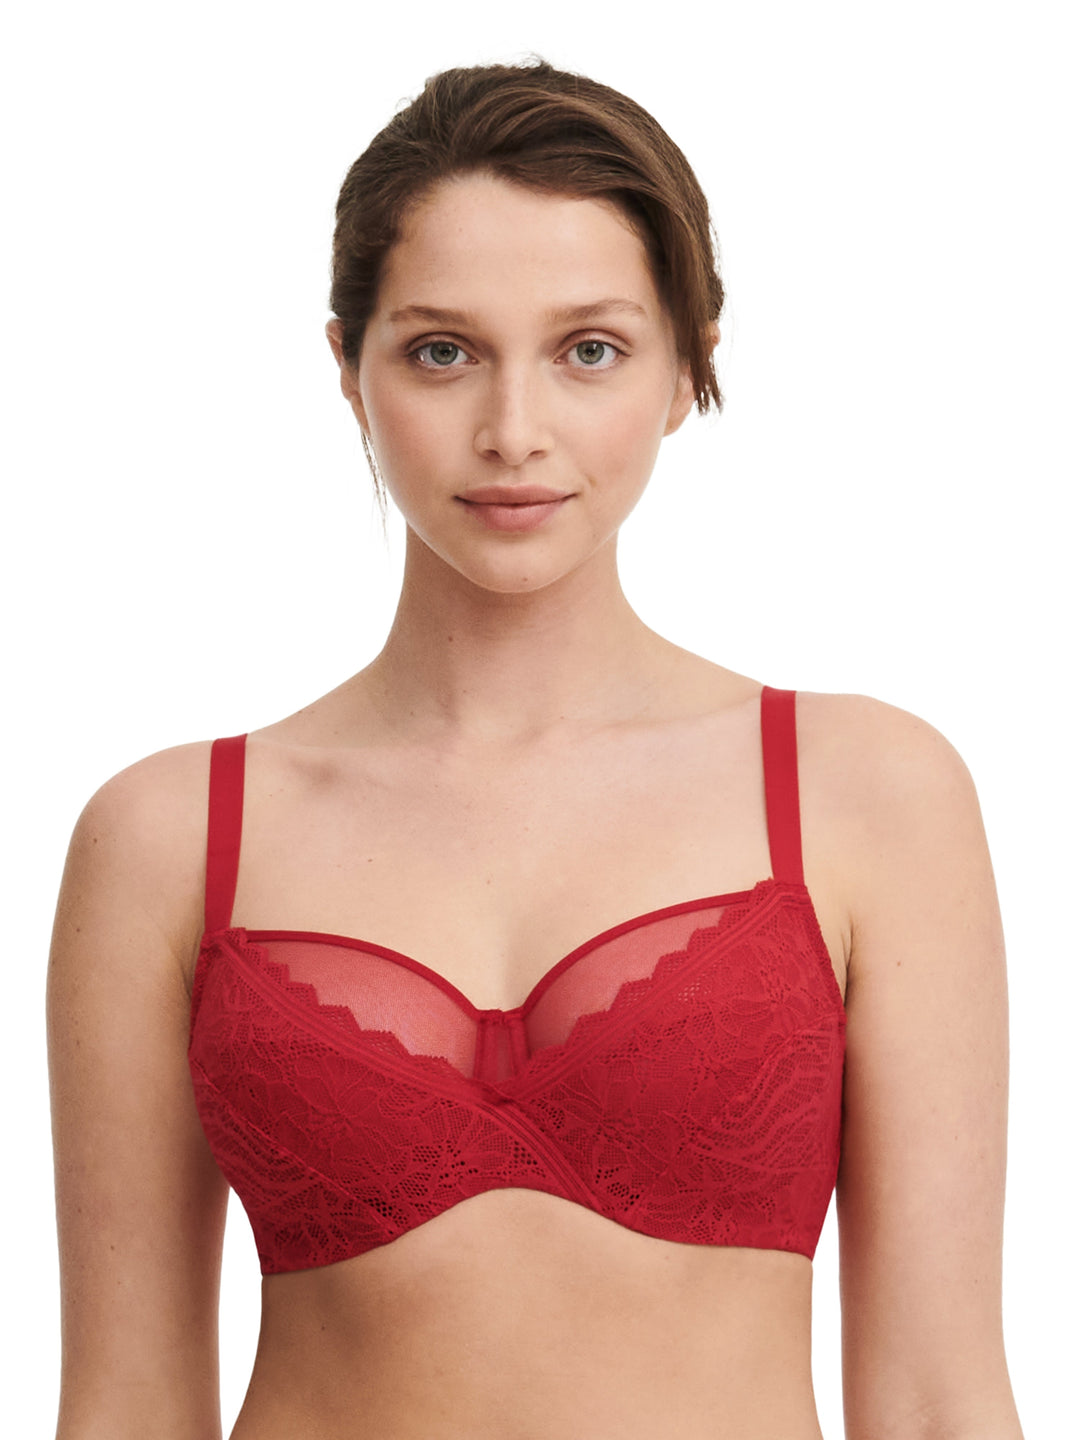 Chantelle Easyfeel - Floral Touch Full Cup Bra Scarlet Full Cup Bra Chantelle EasyFeel 